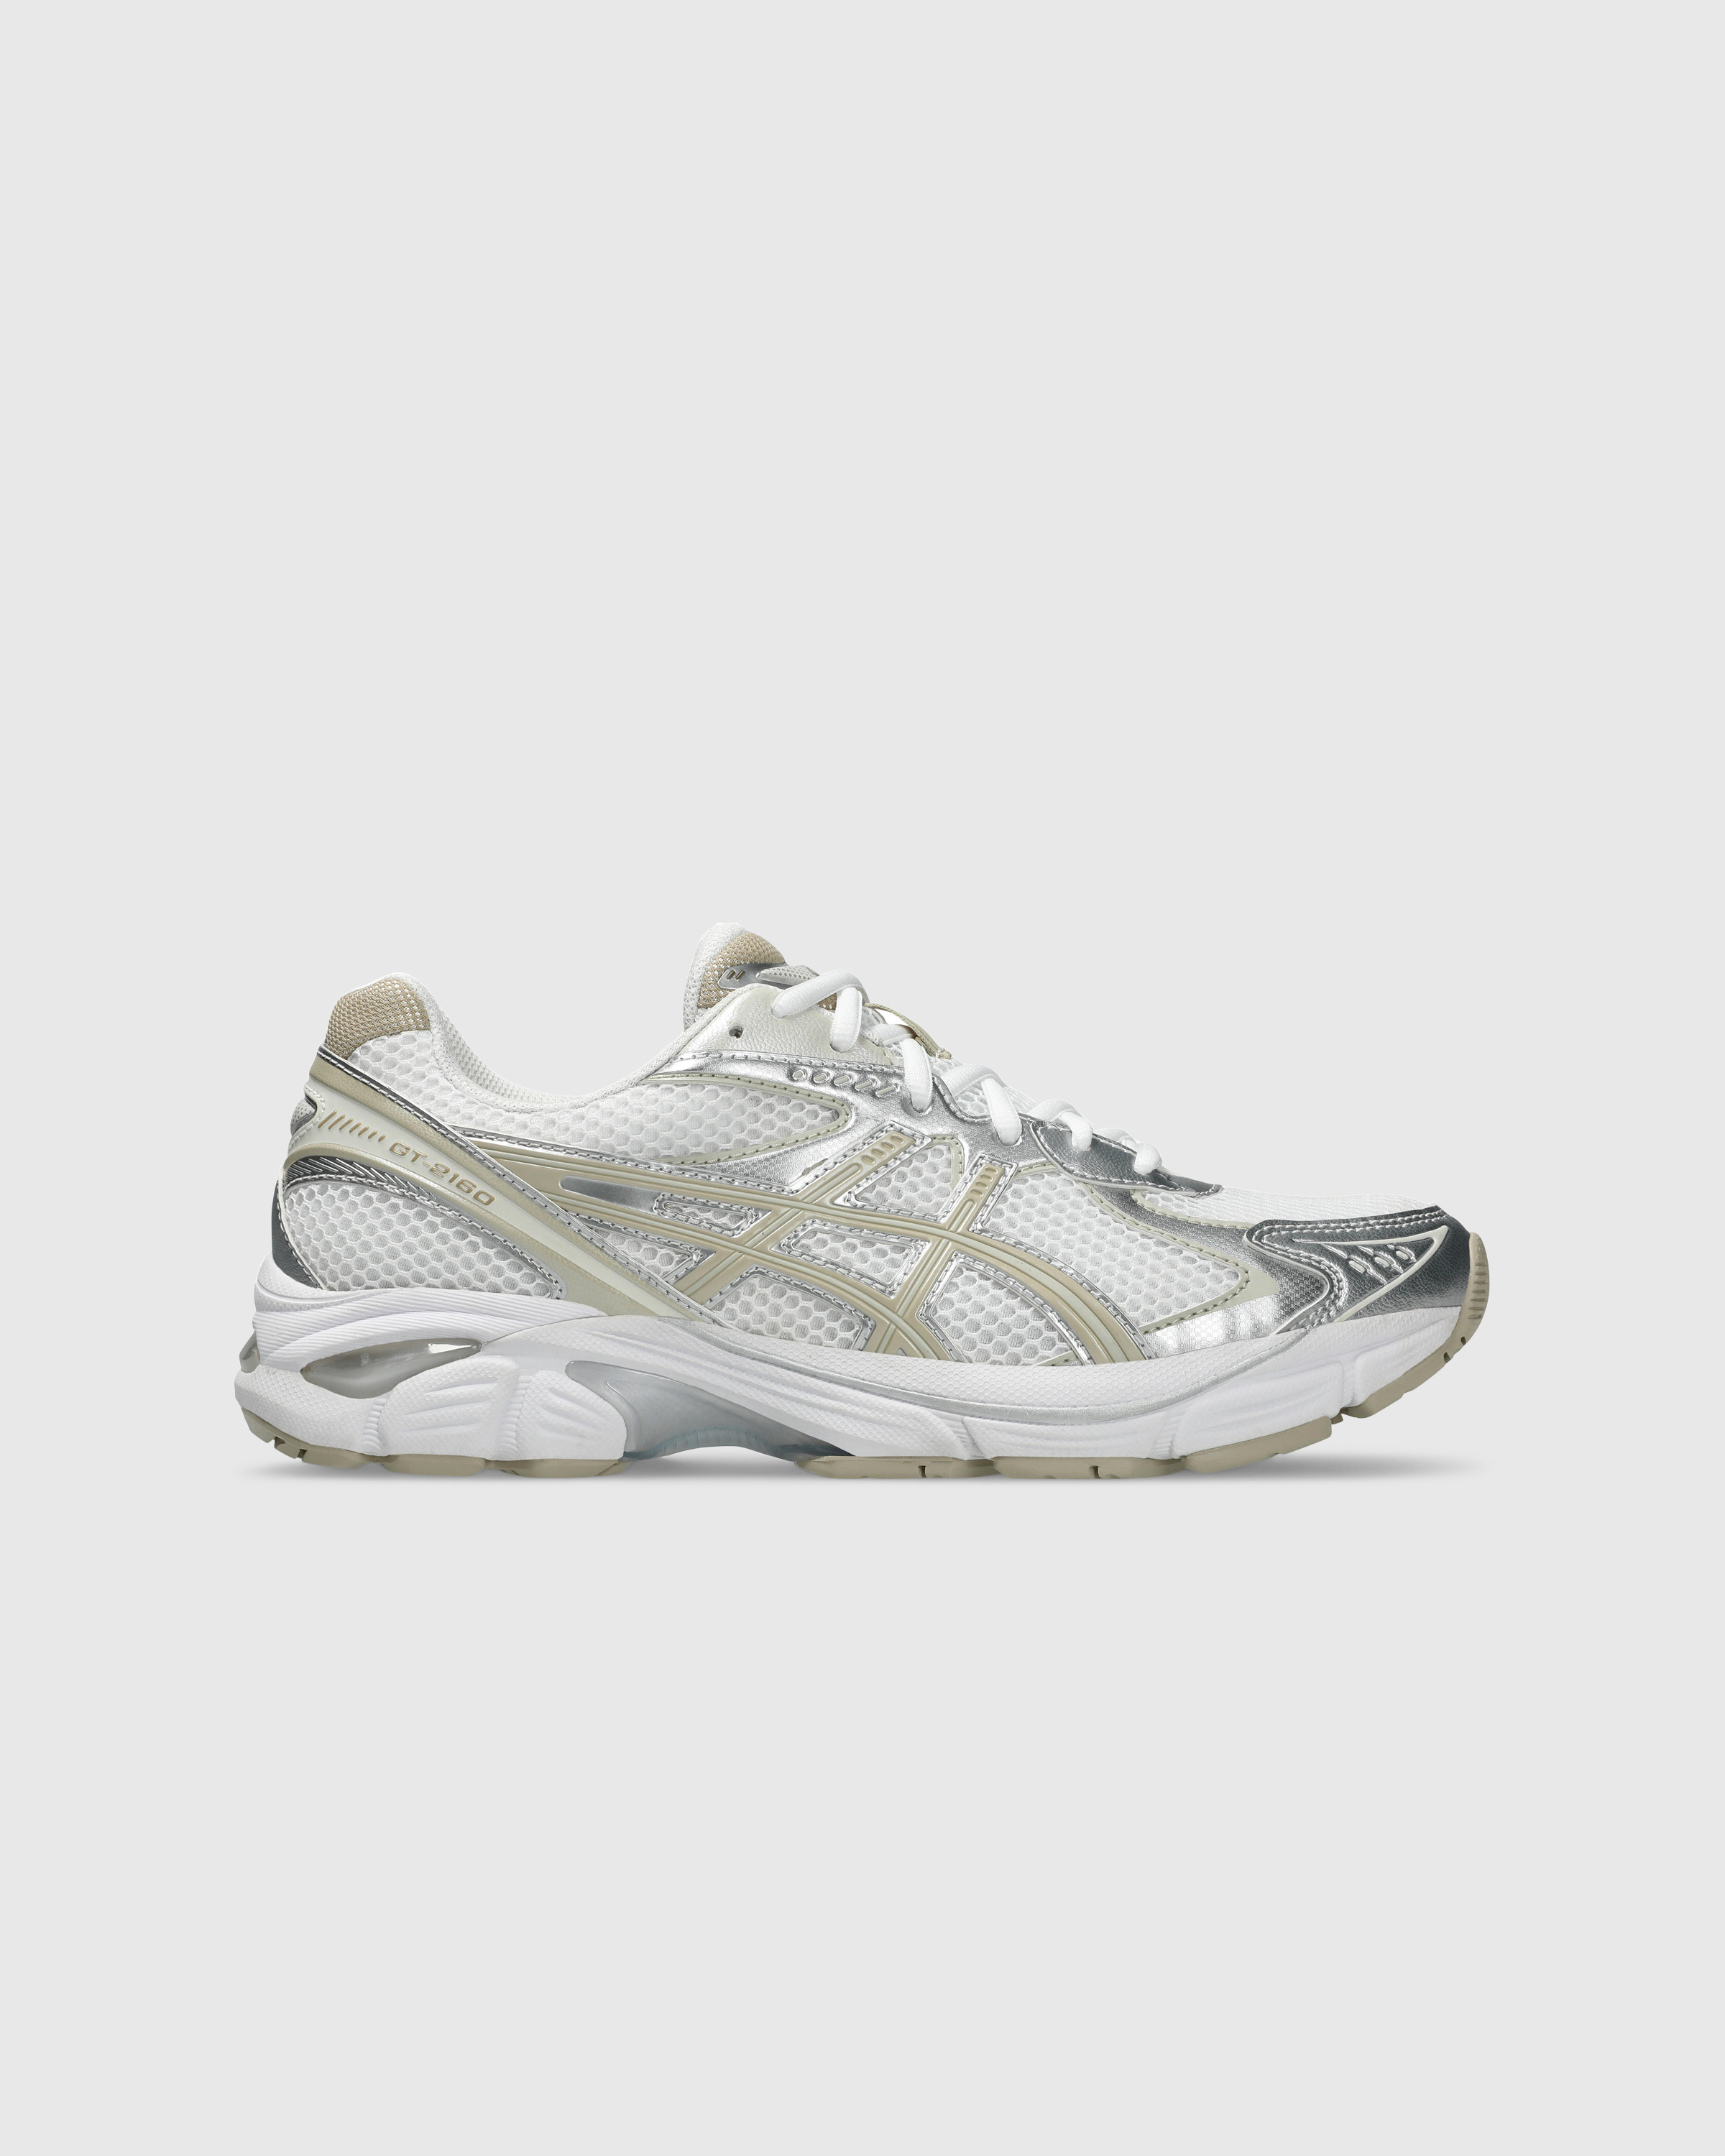 asics – GT-2160 White/Putty - Low Top Sneakers - White - Image 1